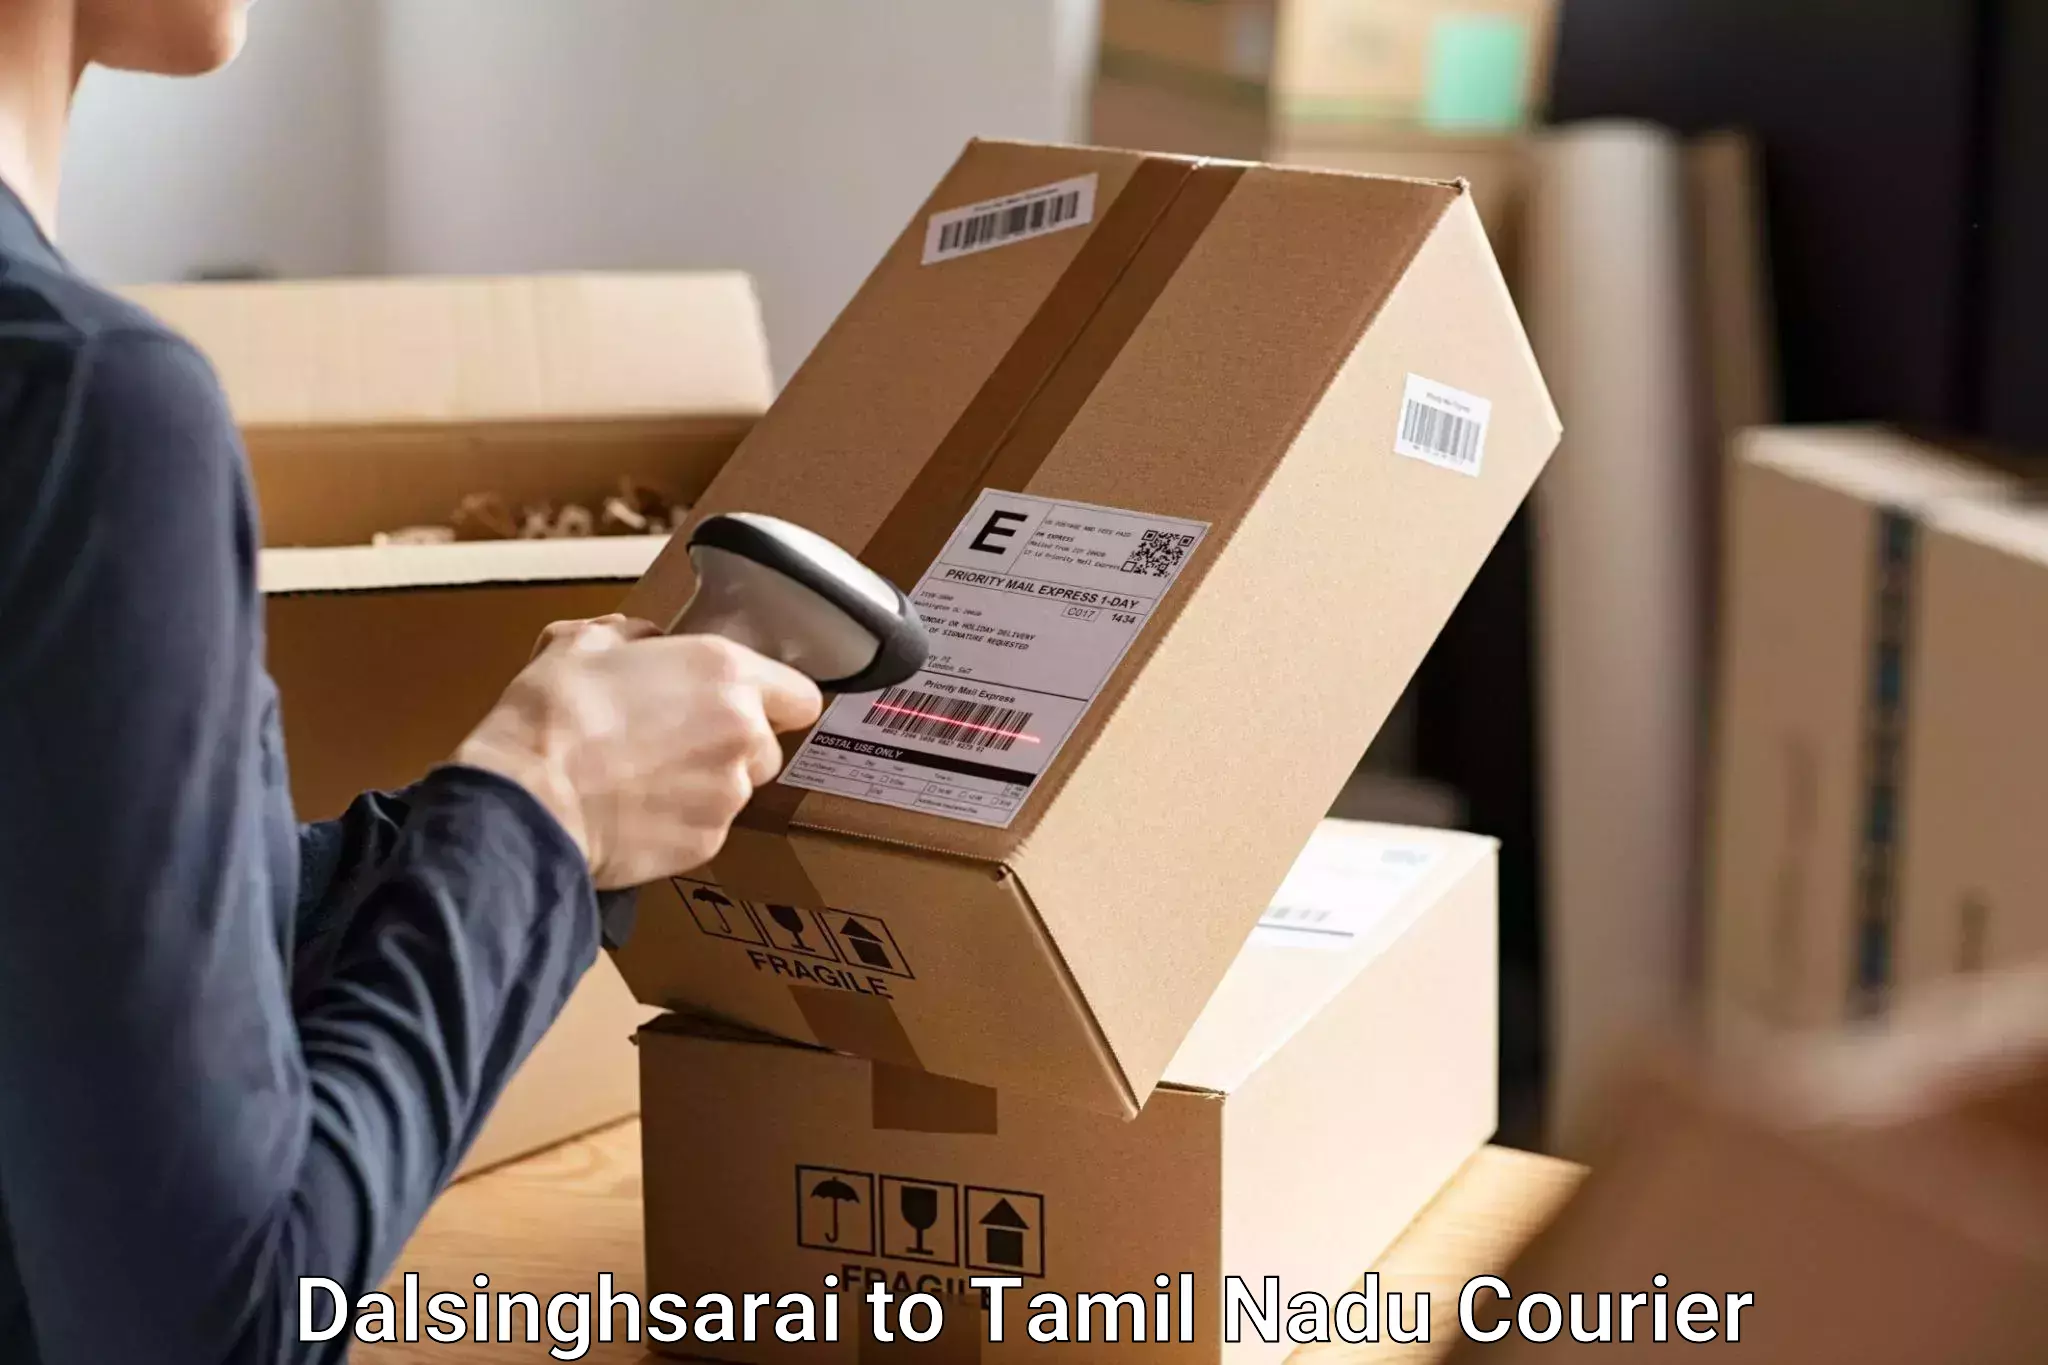 Luggage transport consulting Dalsinghsarai to Ennore Port Chennai